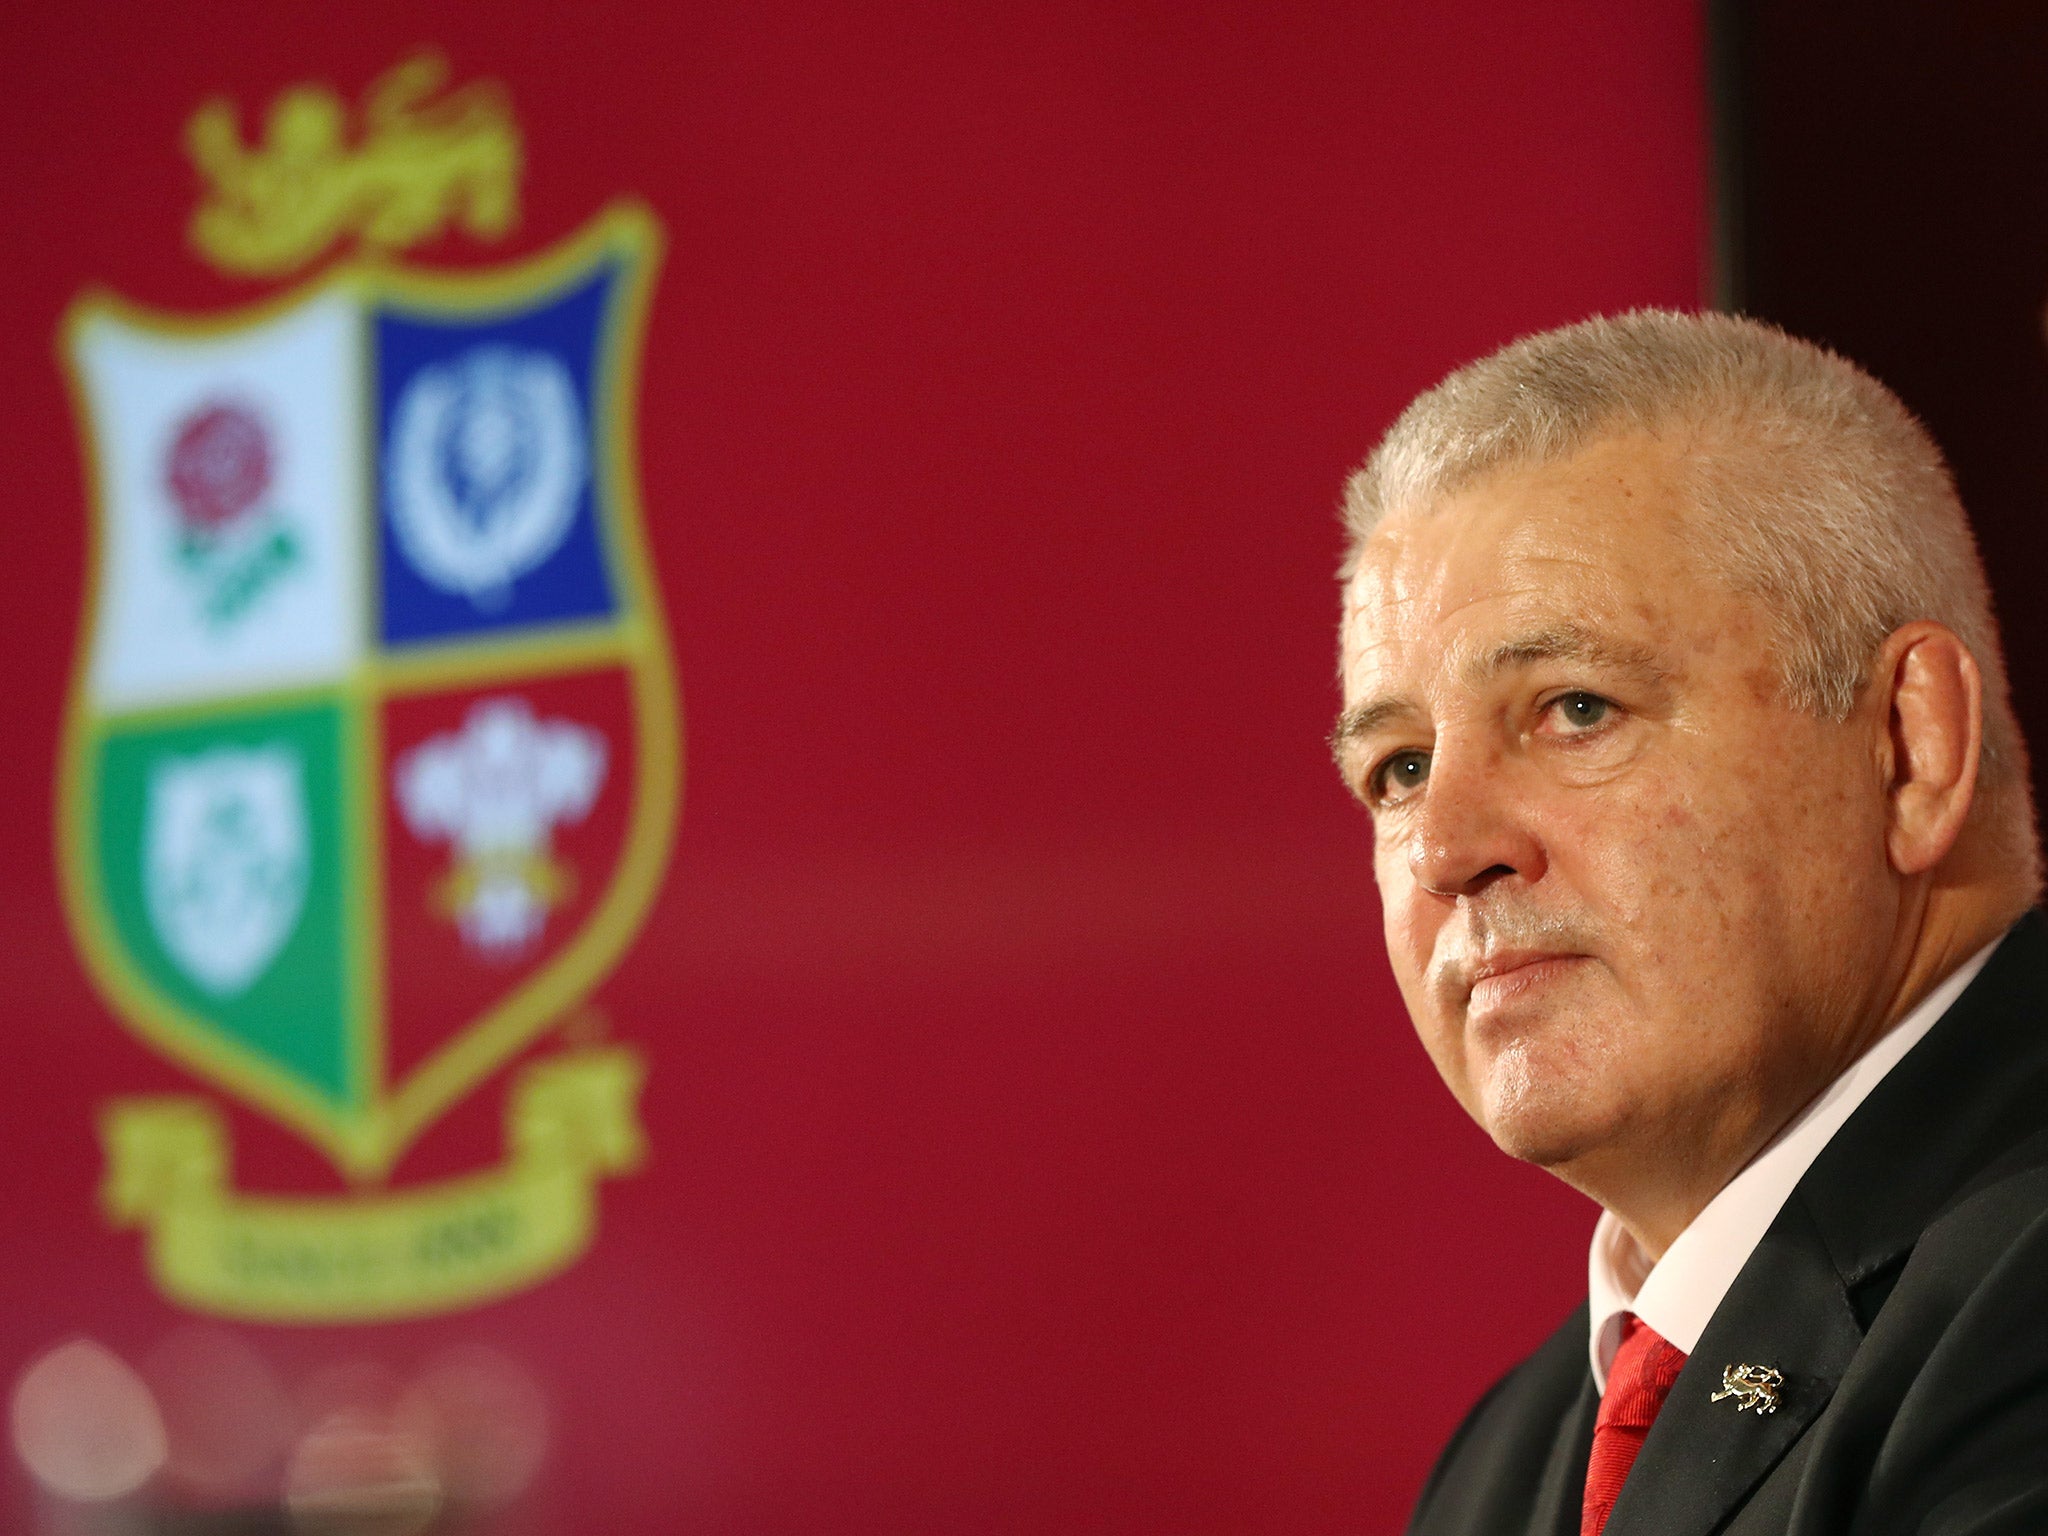 Warren Gatland has been announced as head coach for the British and Irish Lions tour of New Zealand